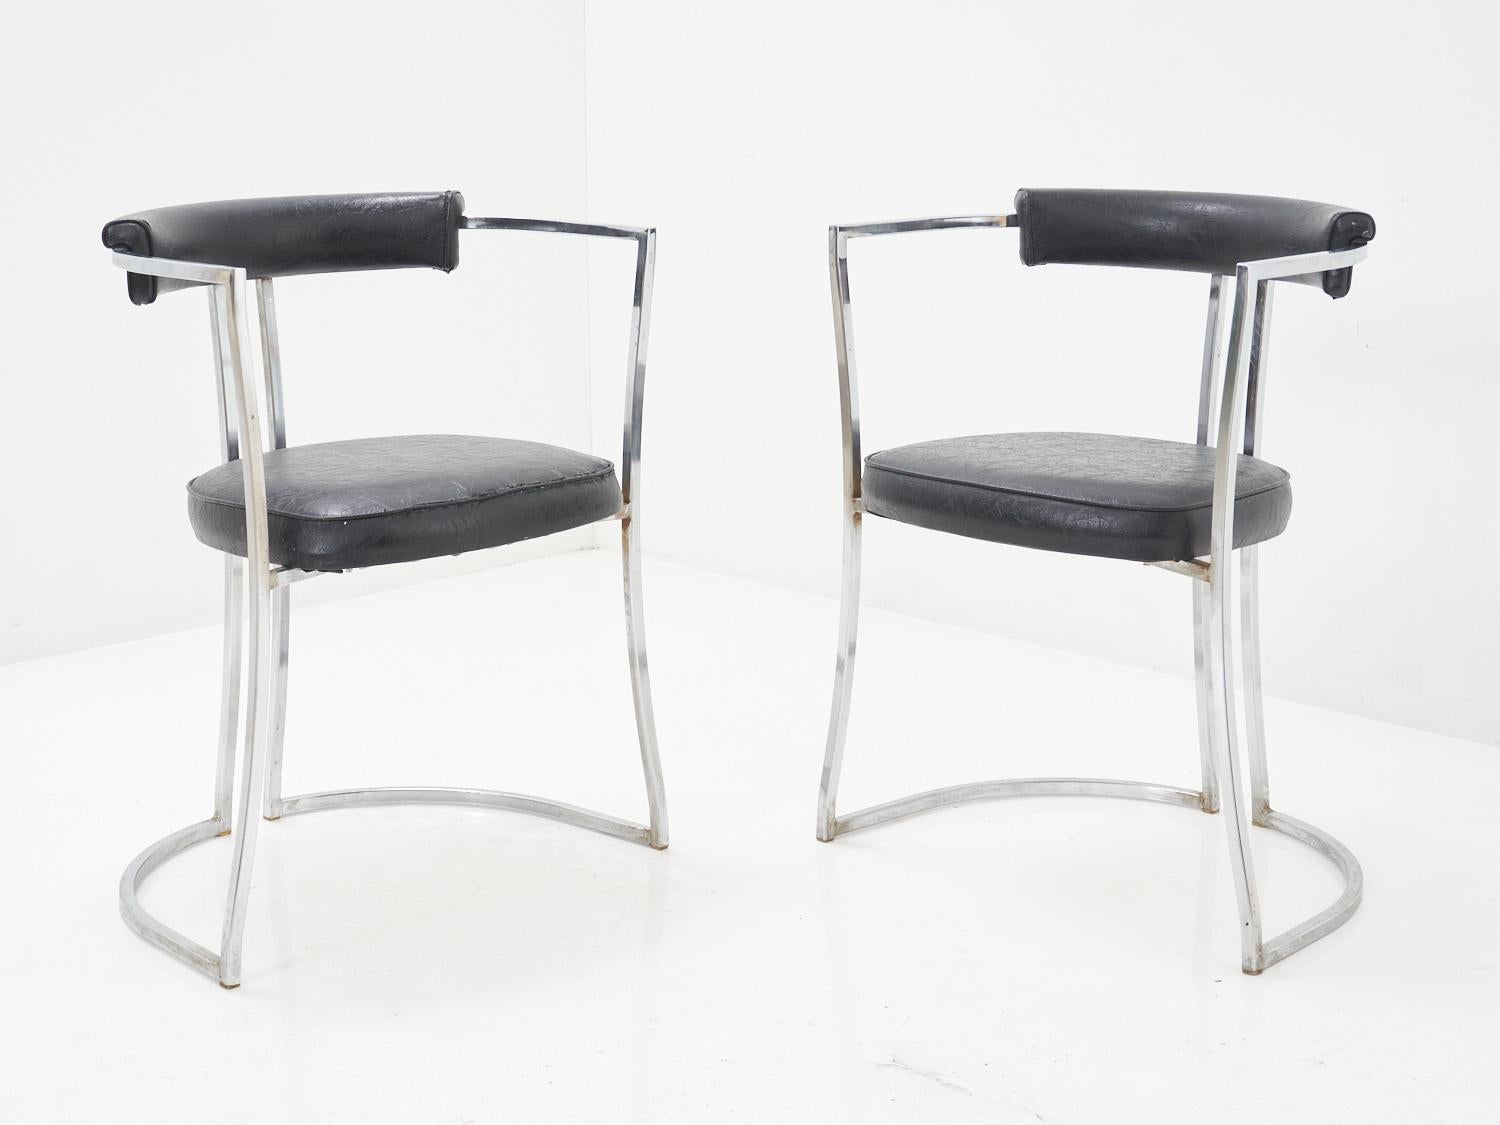 Take a seat in this Sculptural Chrome Chair and travel back in time to the funky '70s - groovy vibes included.

- 28.5